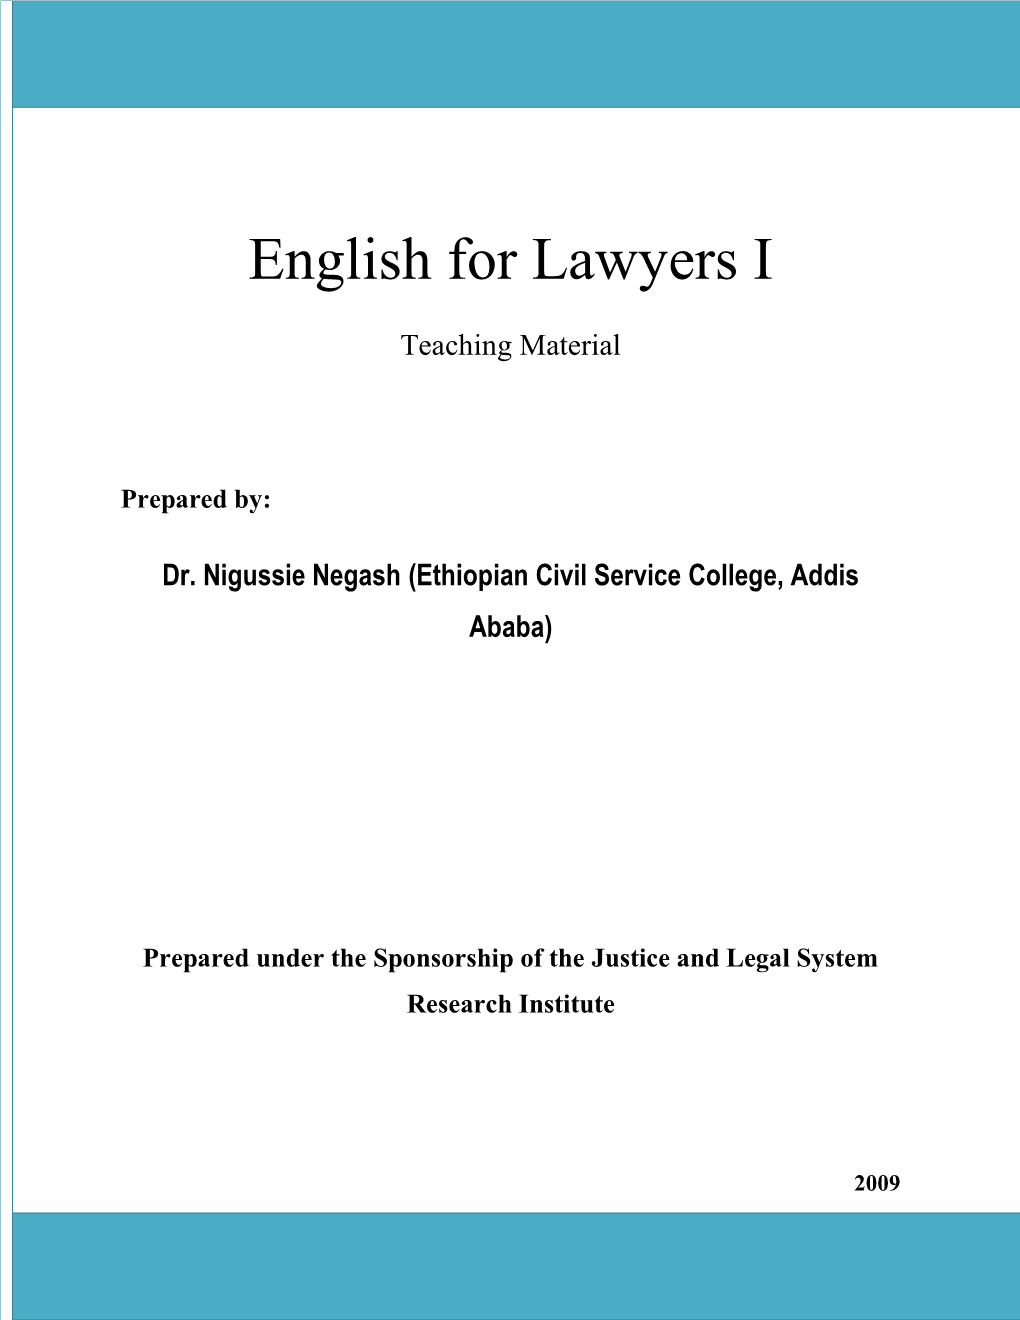 English for Lawyers I